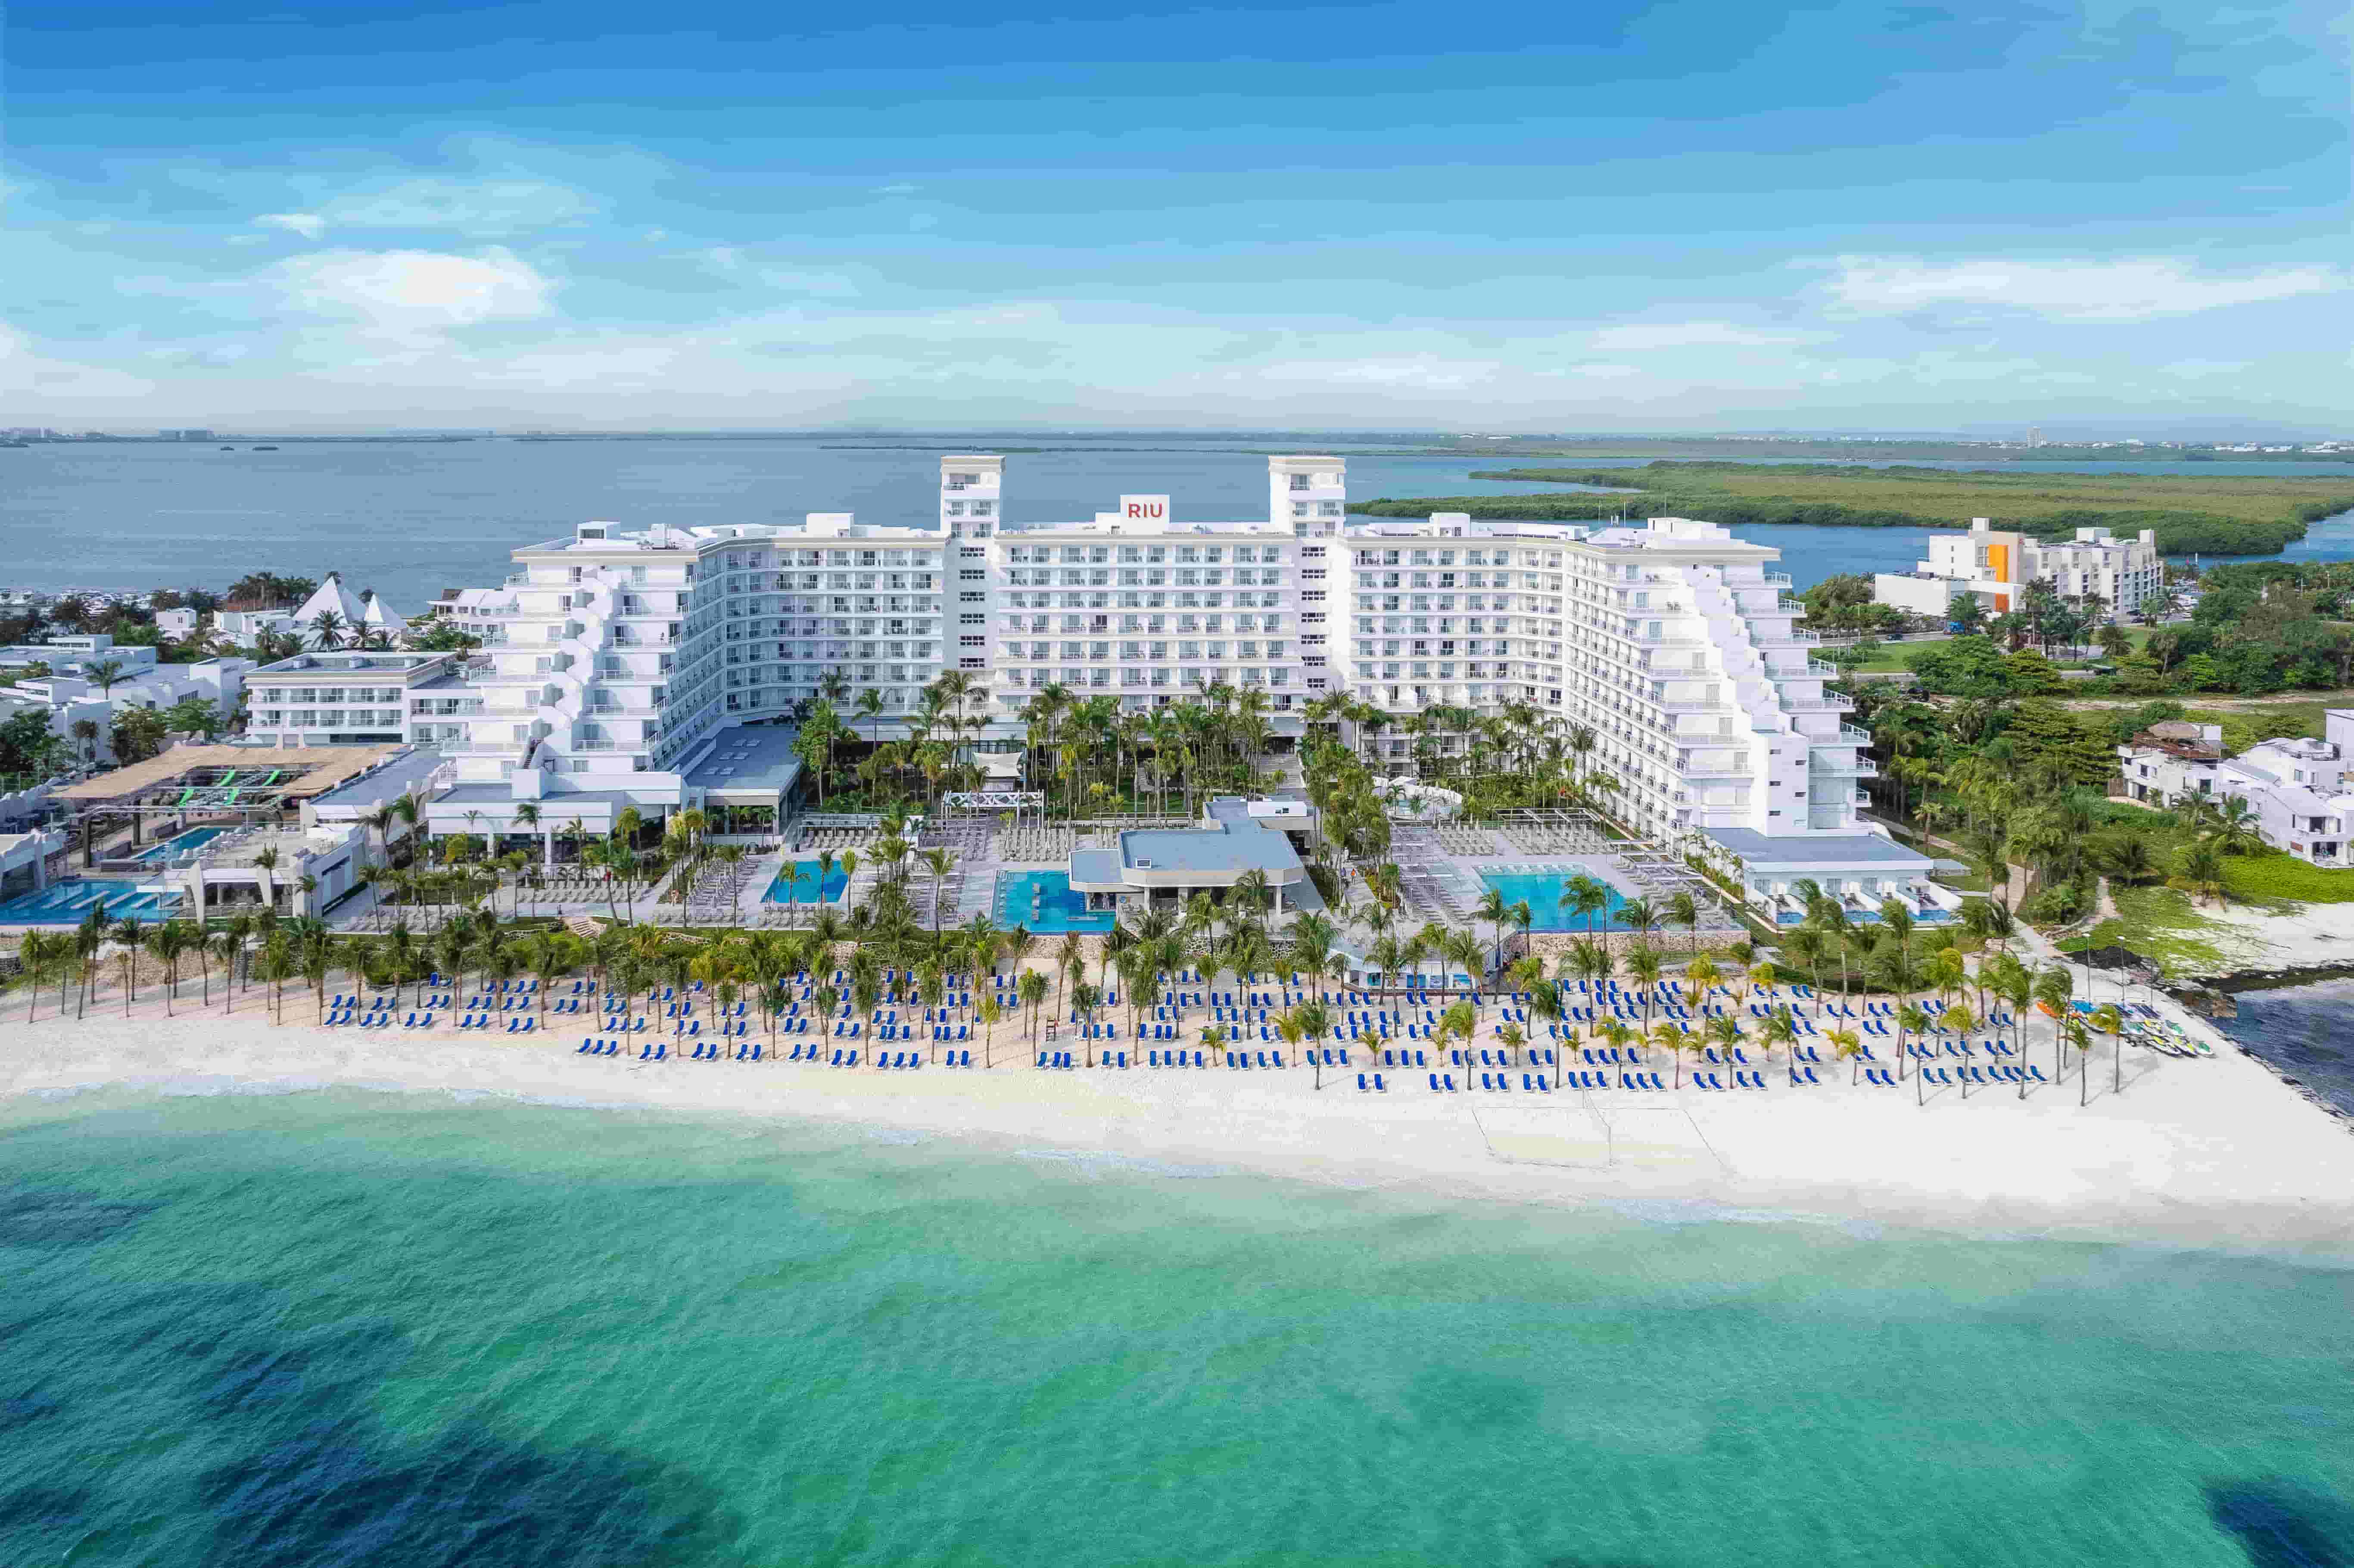 RIU completes the refurbishment of the Riu Caribe and brings its RIU Party events to Cancun